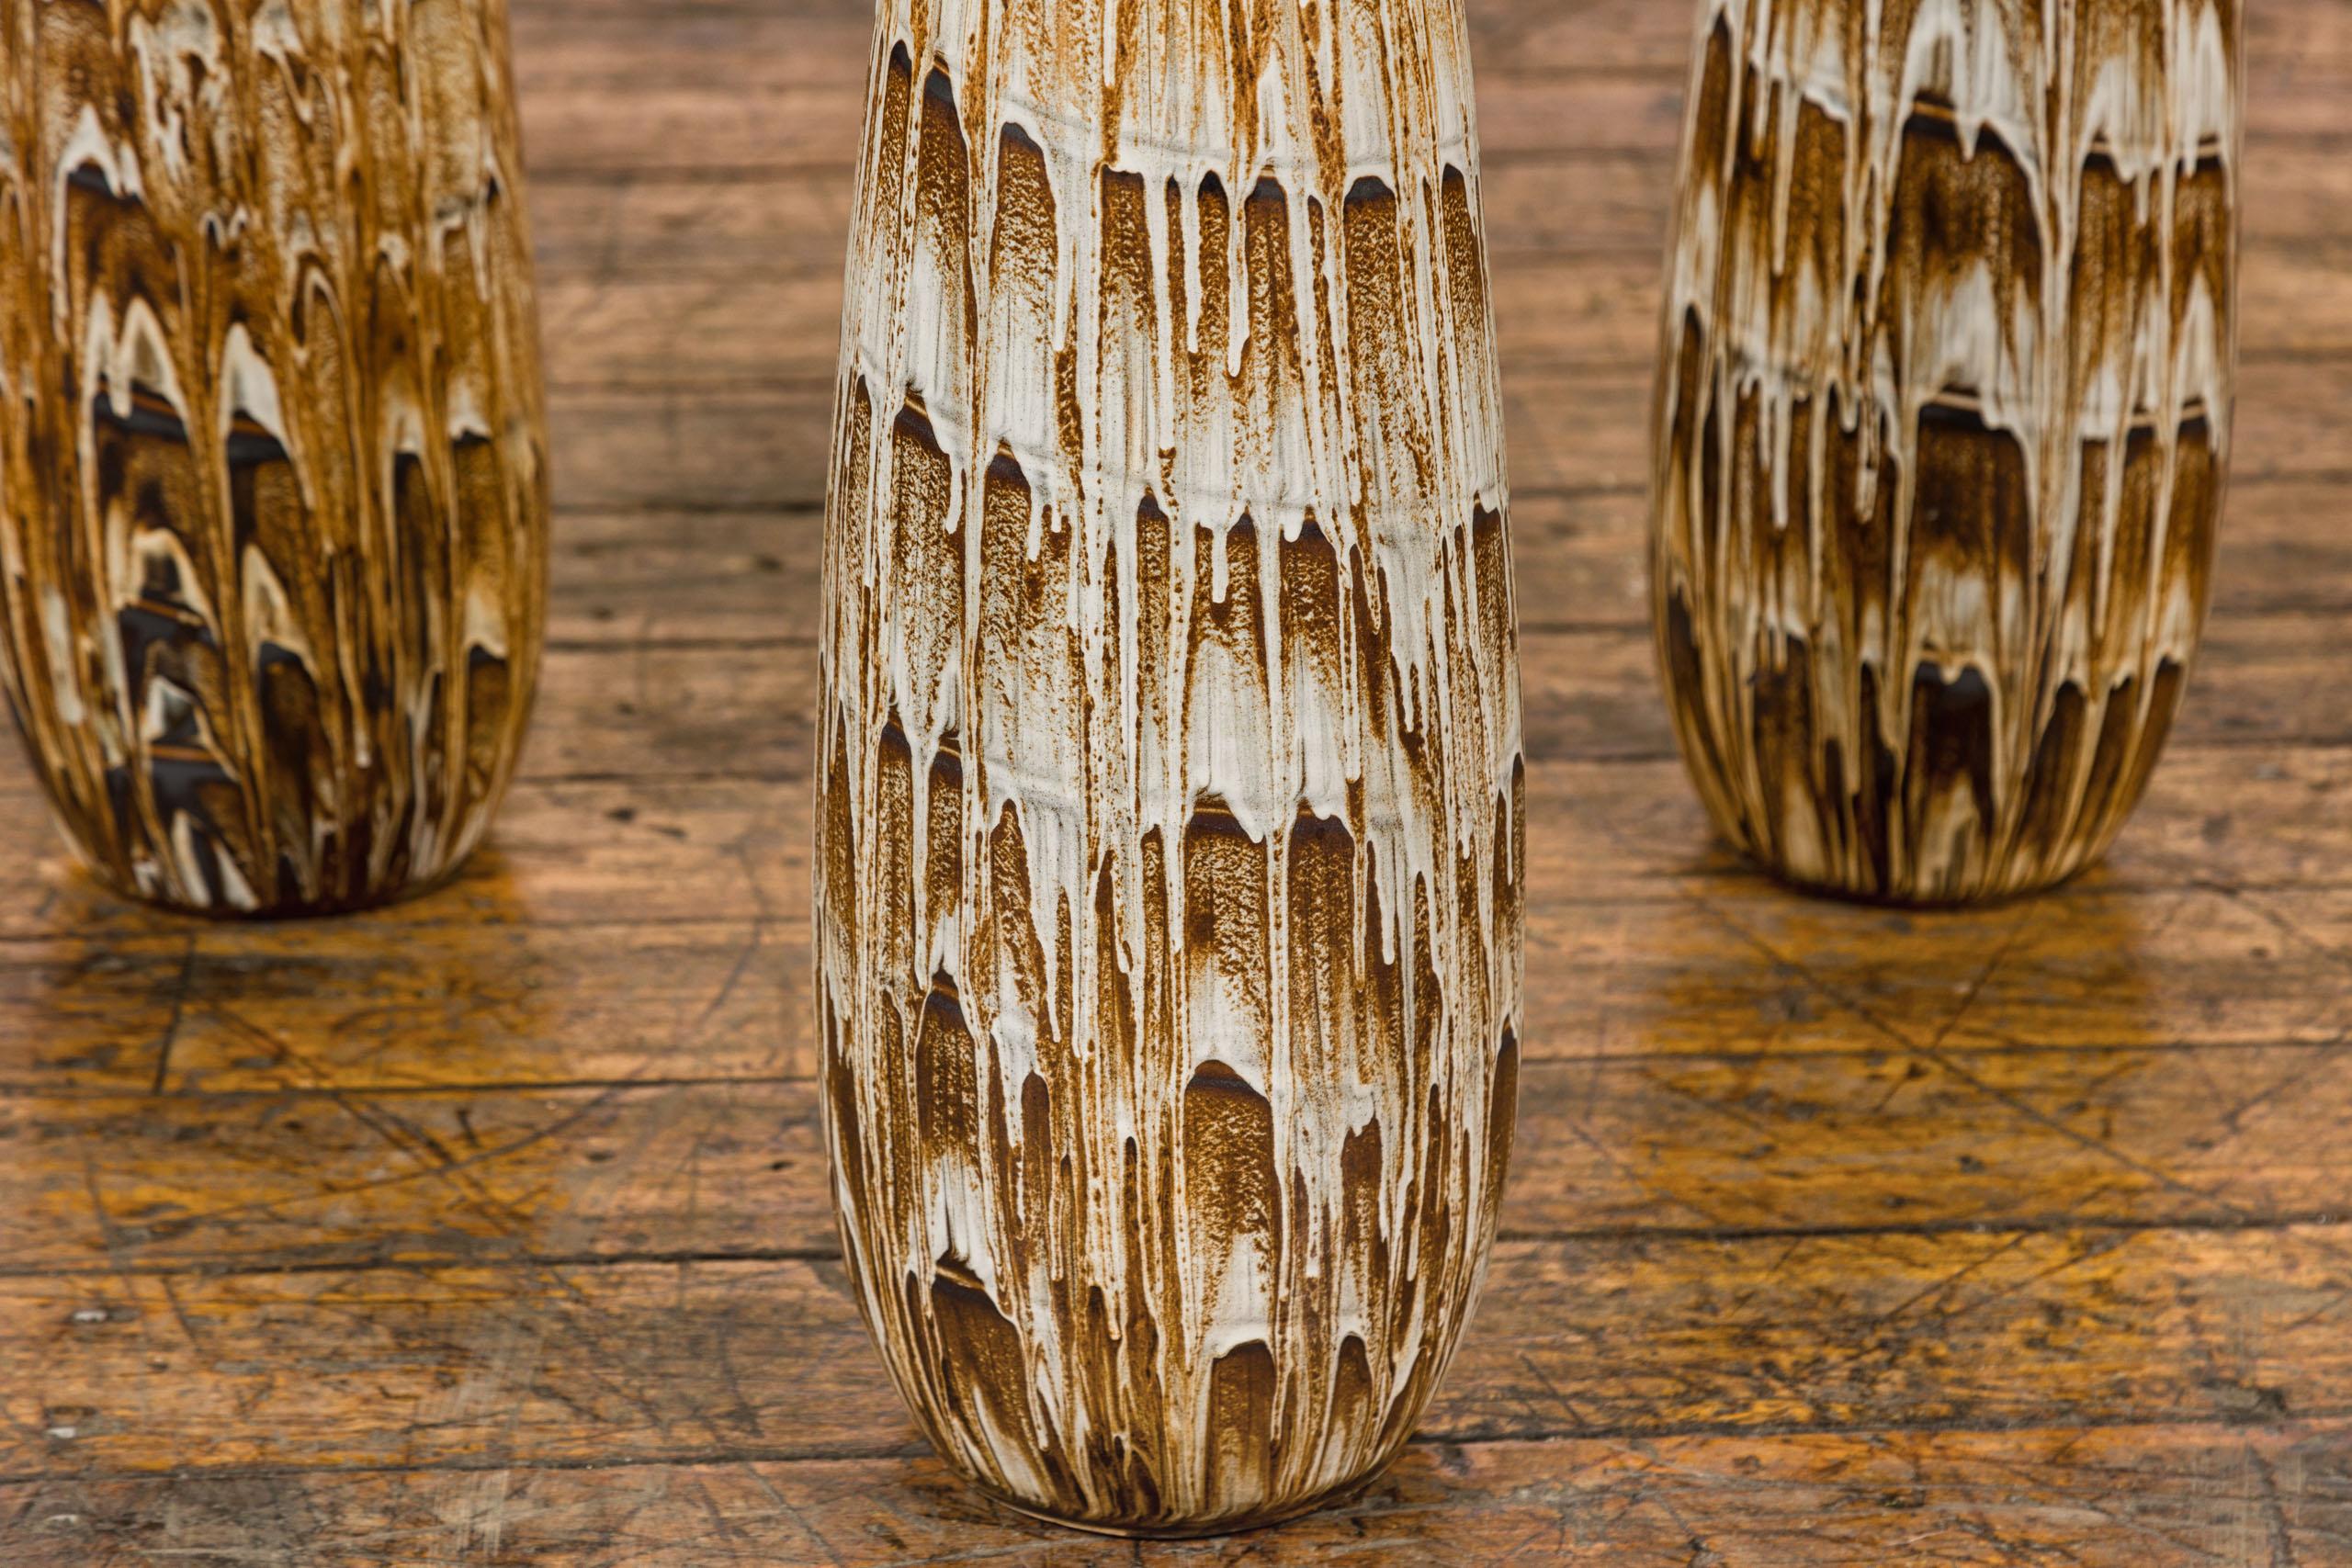 Slender Ceramic Vases with Spiraling Motifs and Brown Drip Glaze, Sold Each For Sale 8